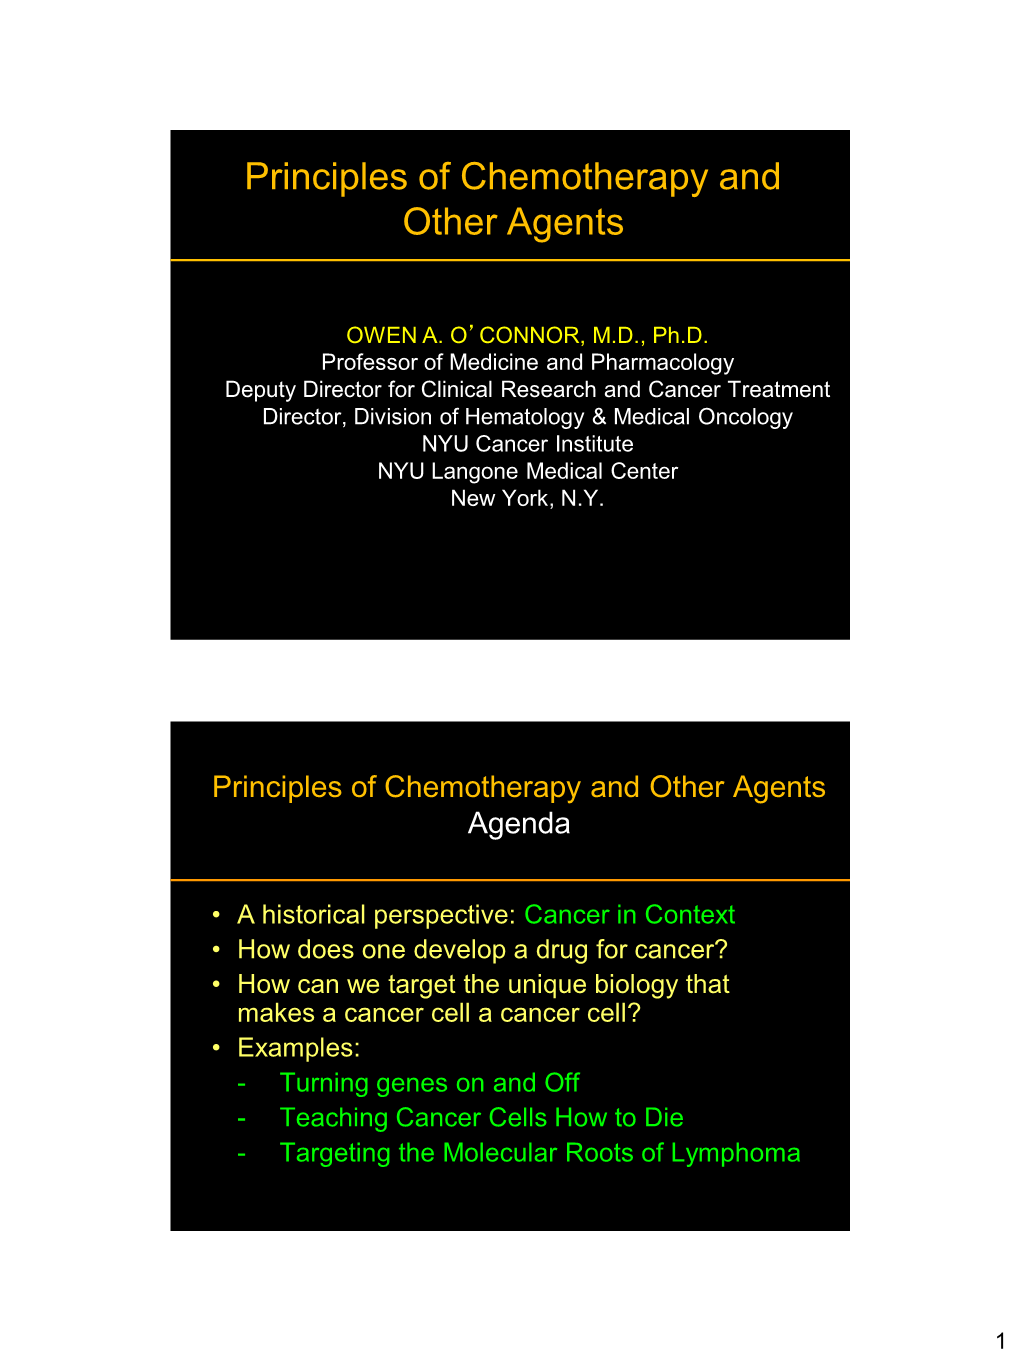 Principles of Chemotherapy and Other Agents